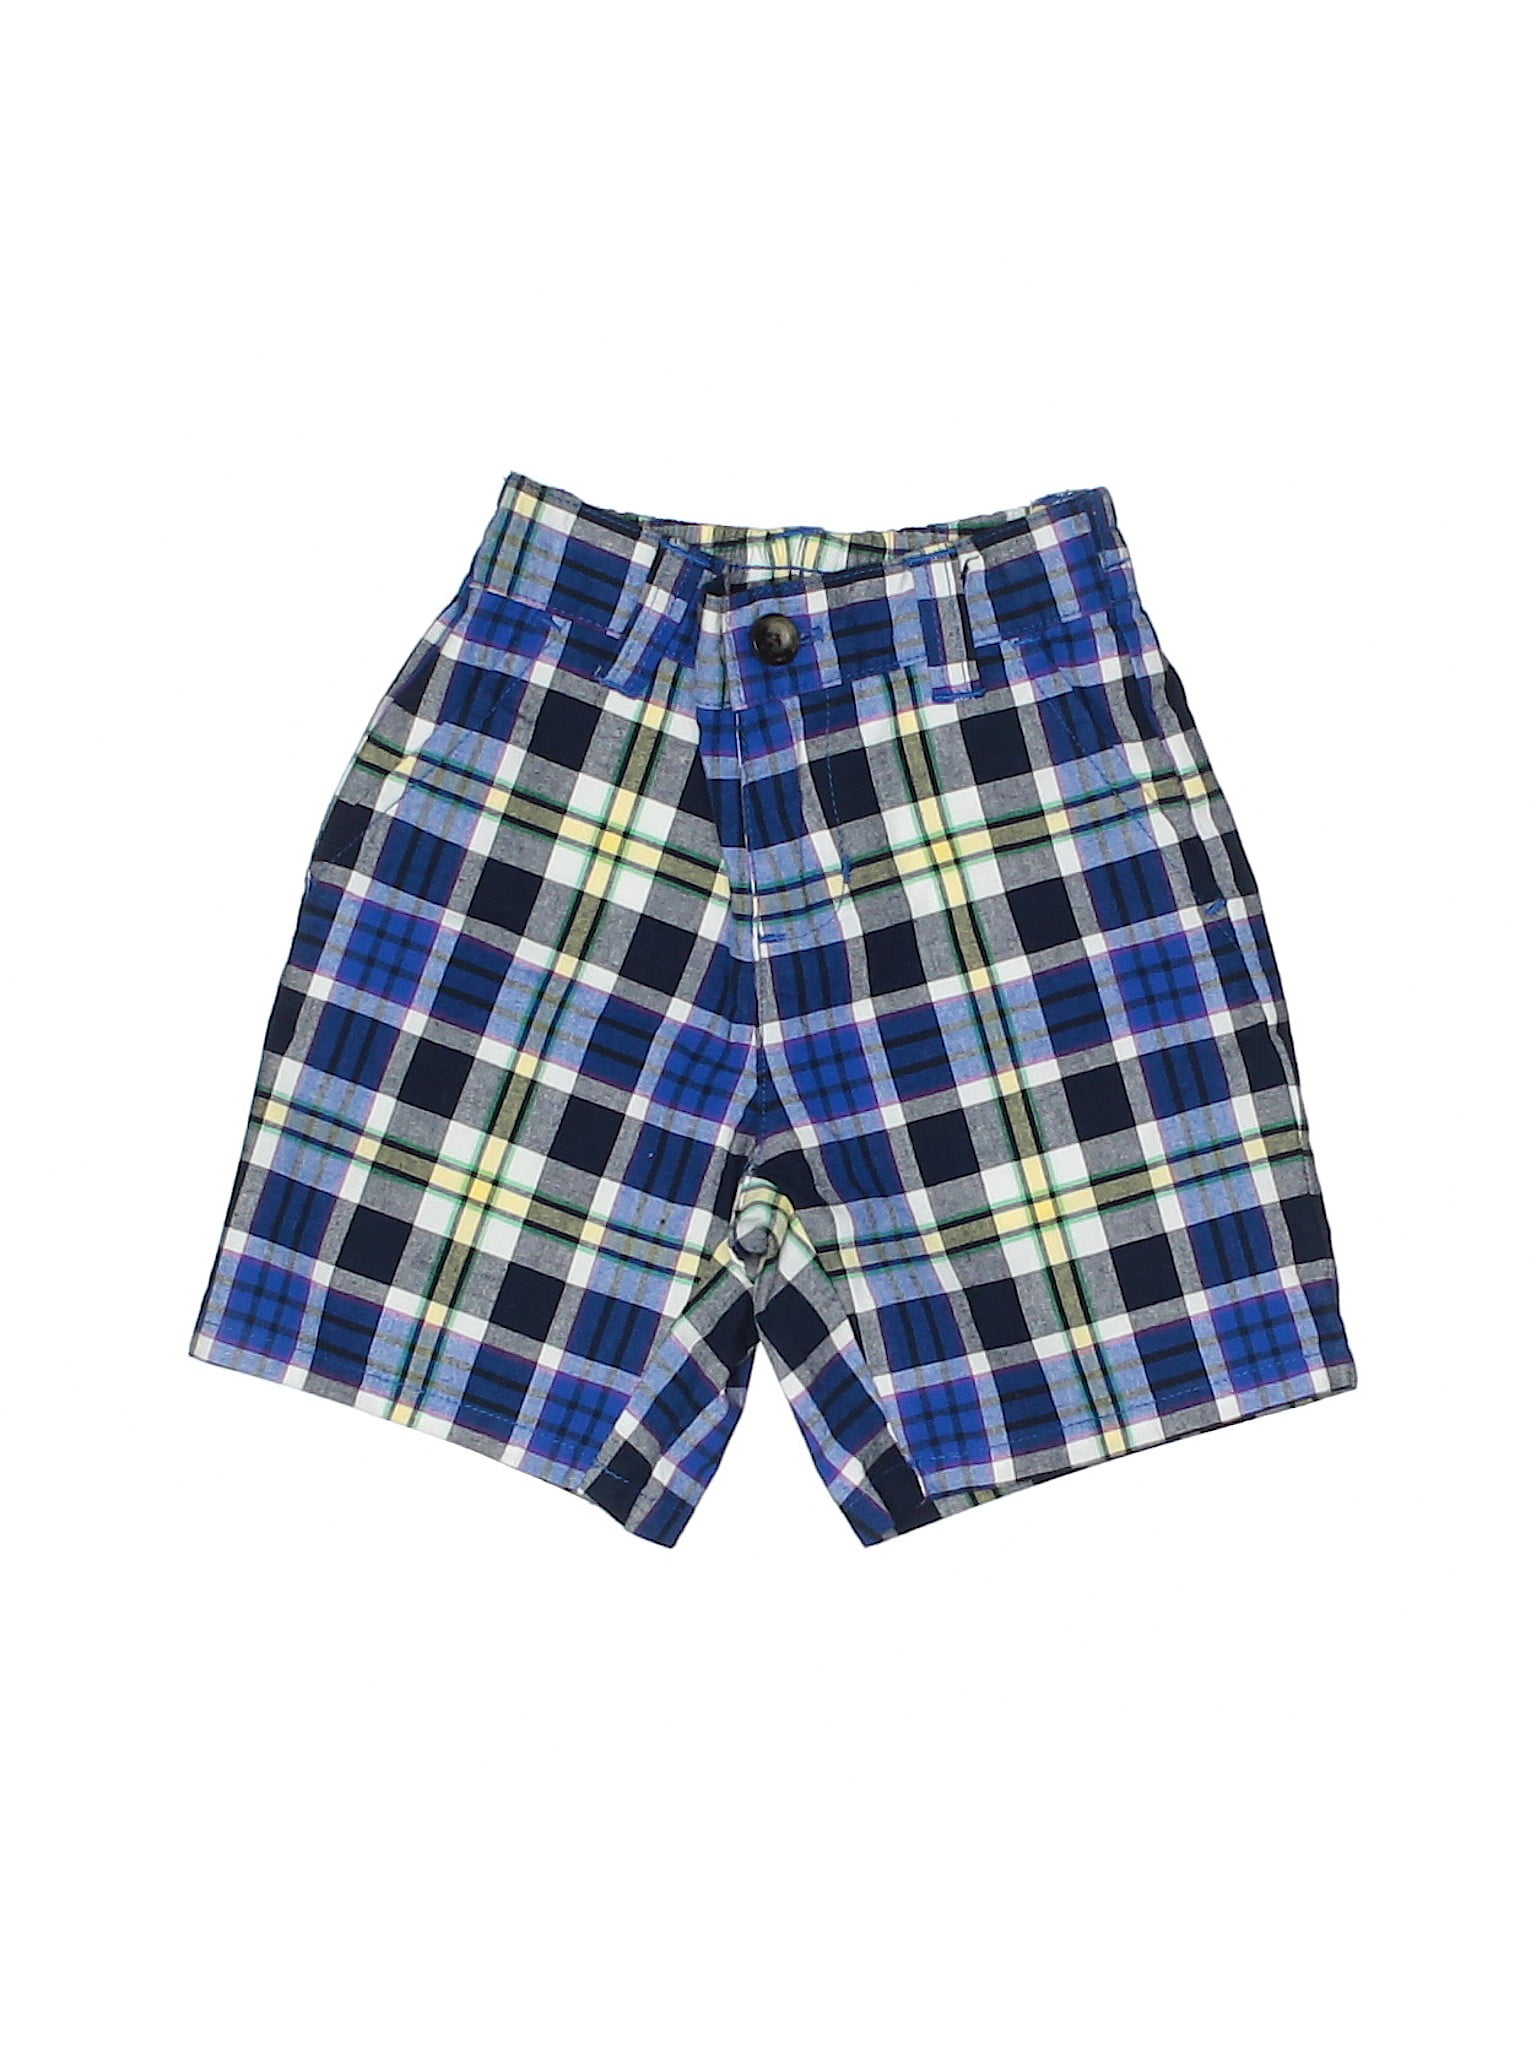 Janie and Jack - Pre-Owned Janie and Jack Boy's Size 6-12 Mo Shorts ...